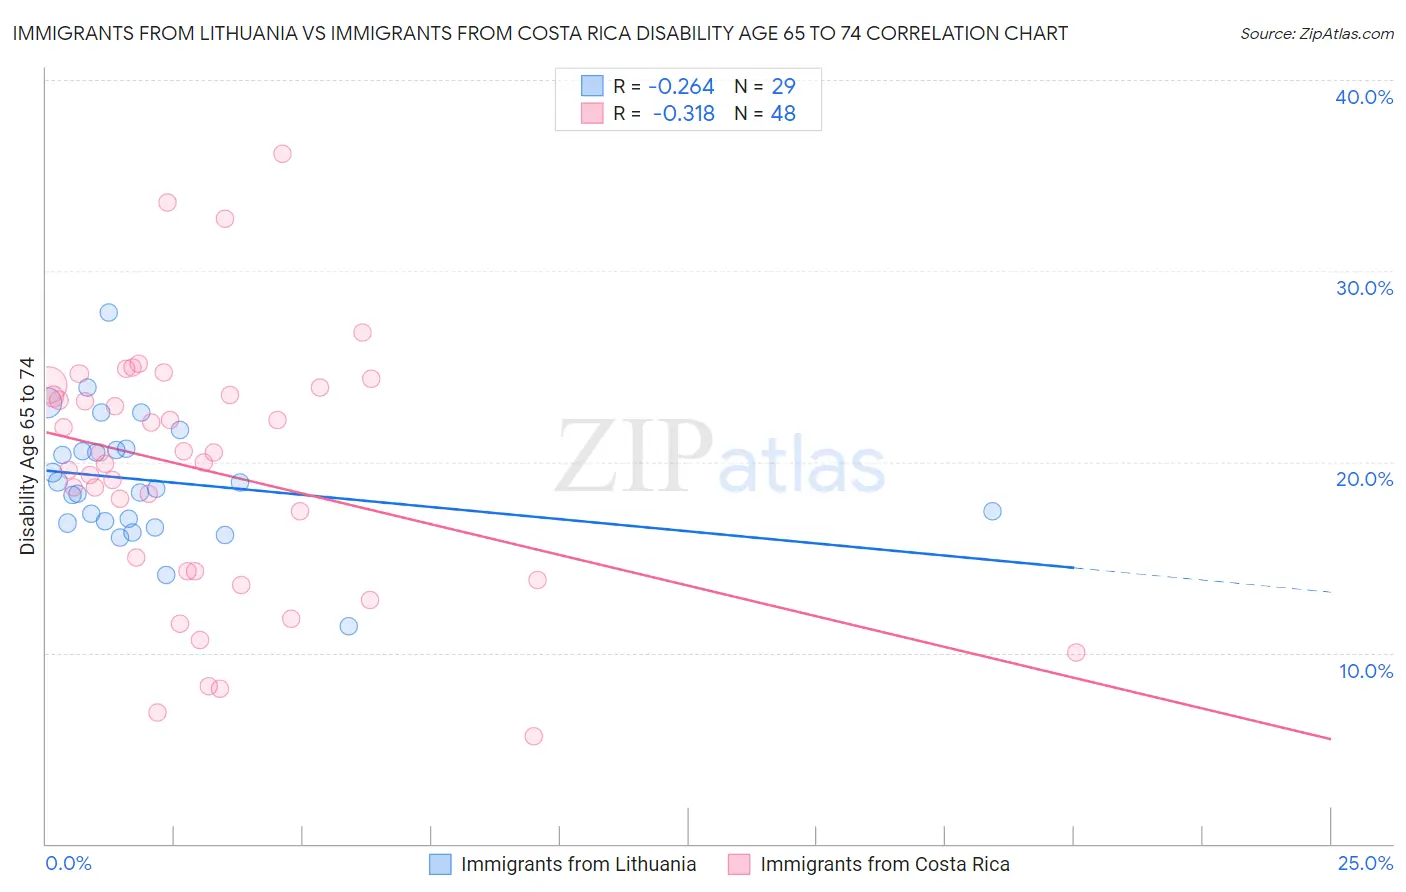 Immigrants from Lithuania vs Immigrants from Costa Rica Disability Age 65 to 74